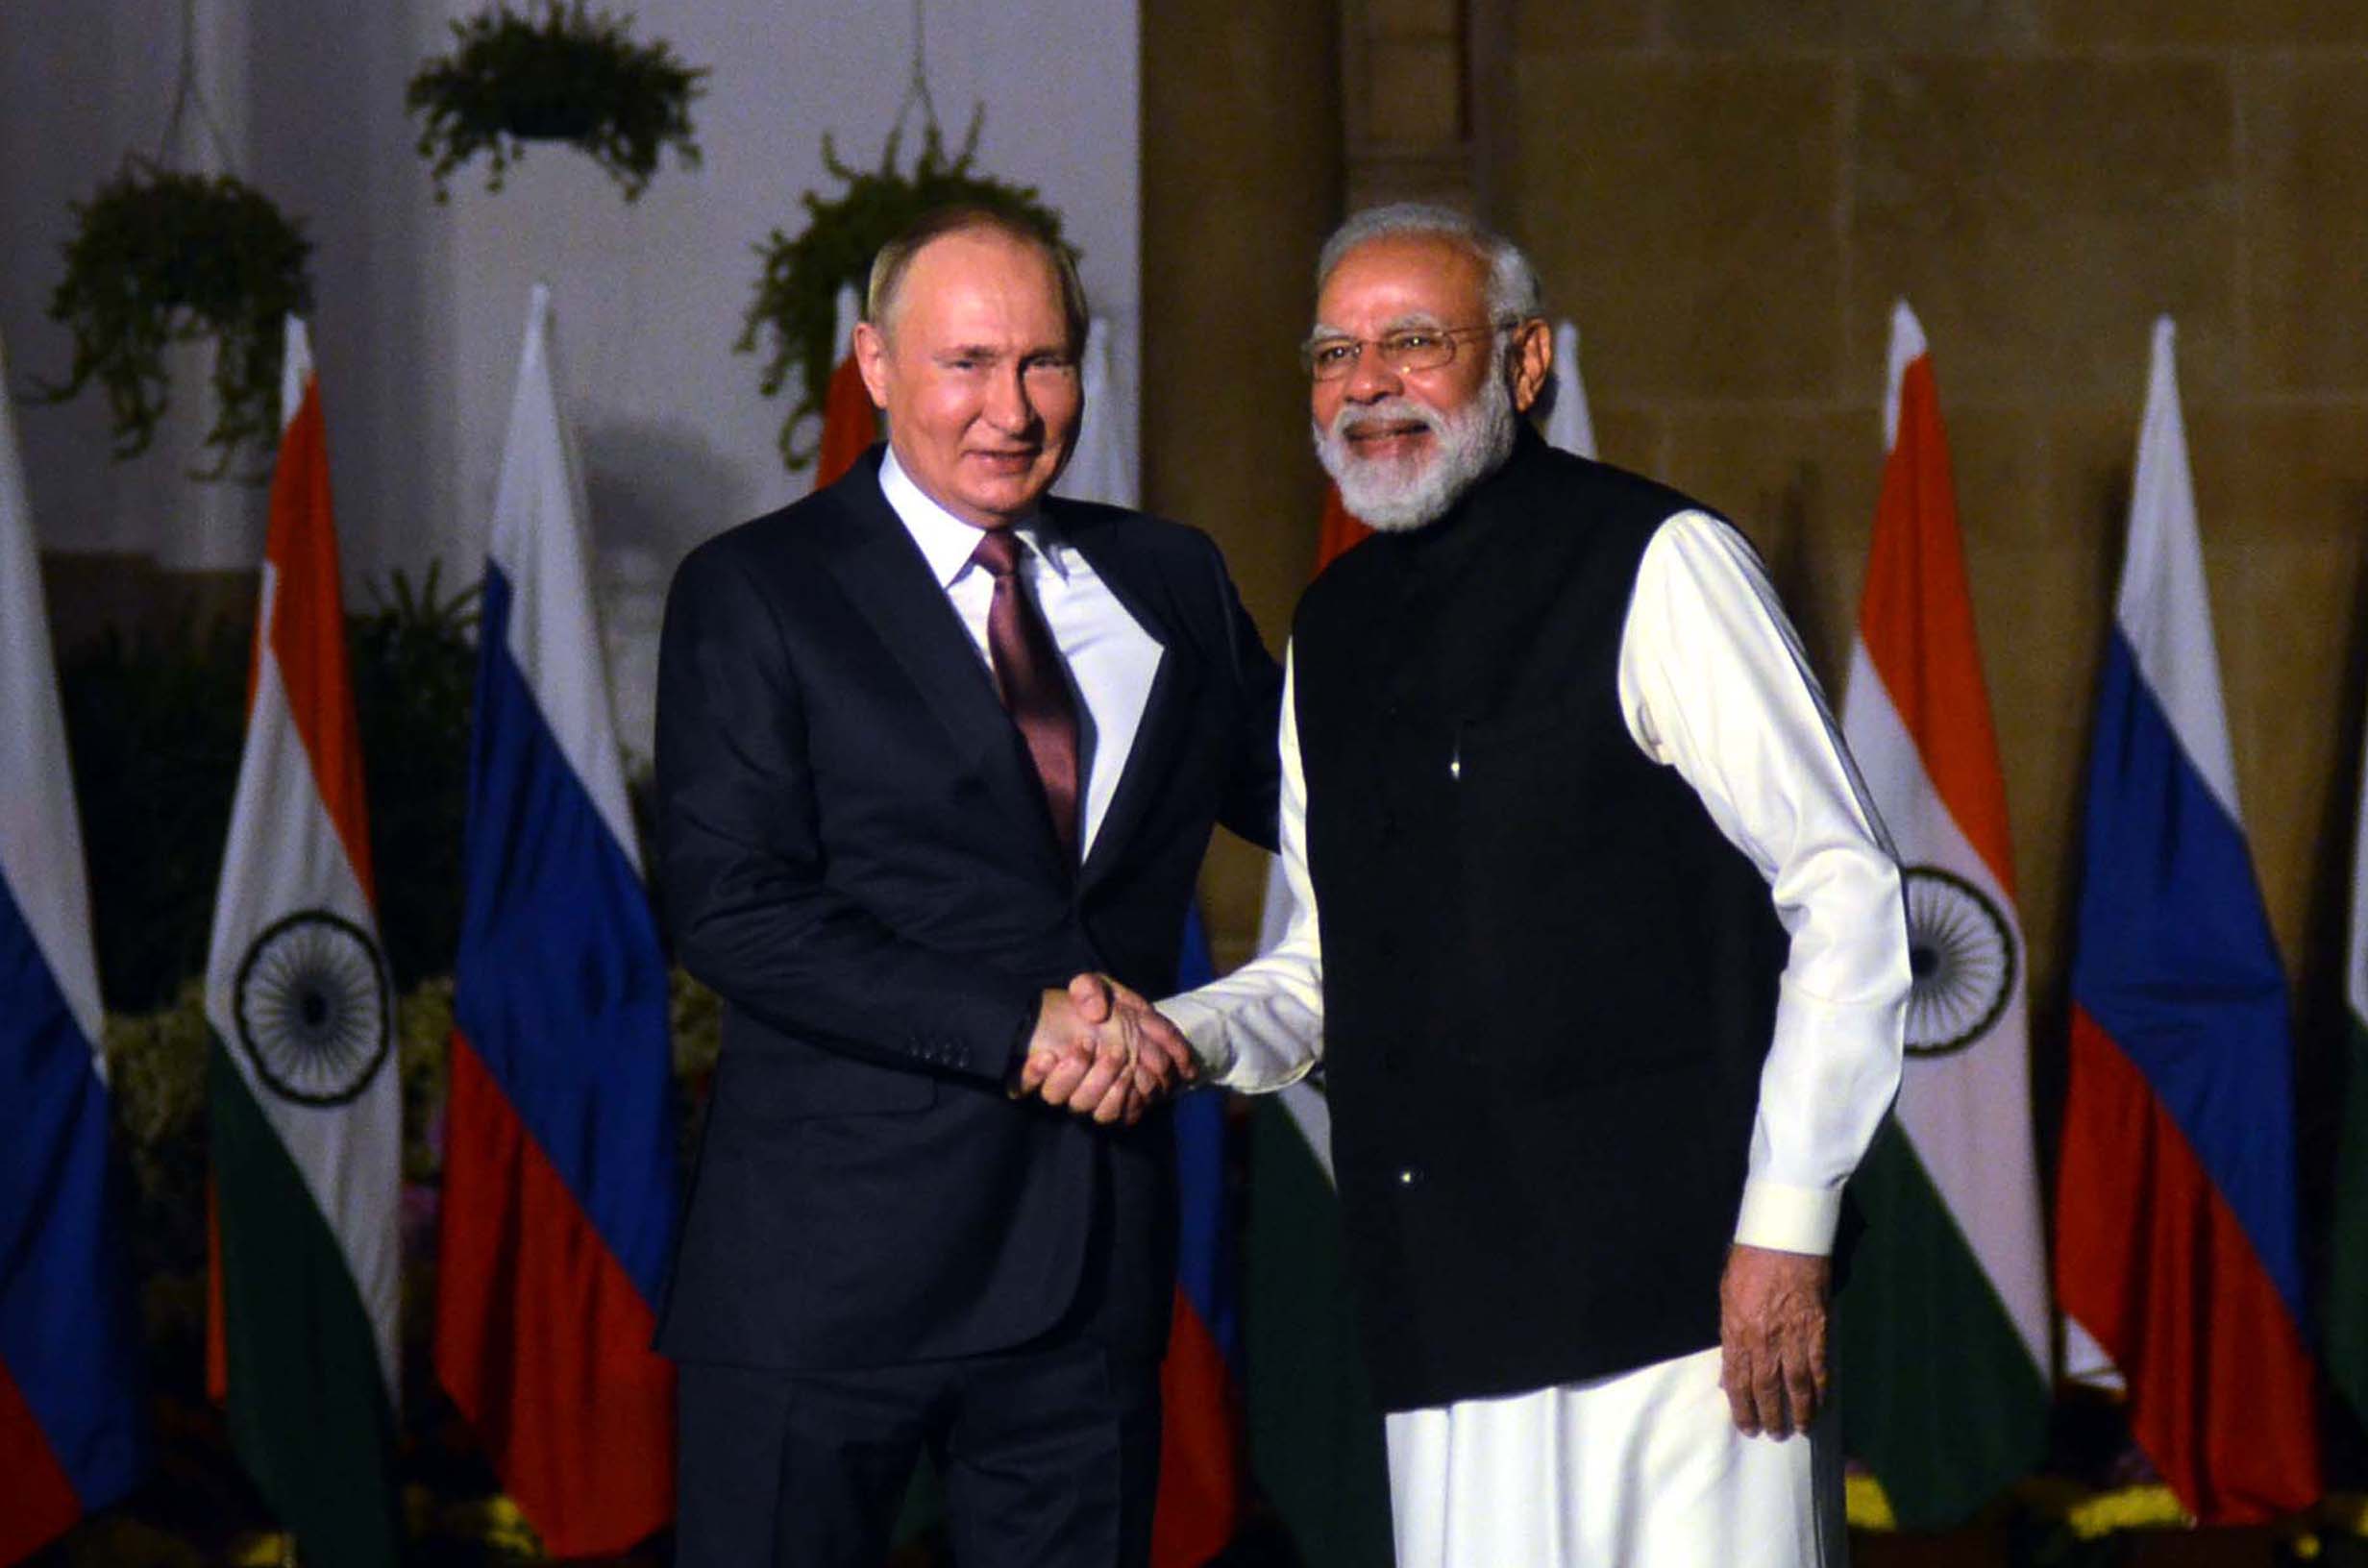 Putin praises PM Modi’s ‘Make-in-India’, asks Russian automakers to emulate it